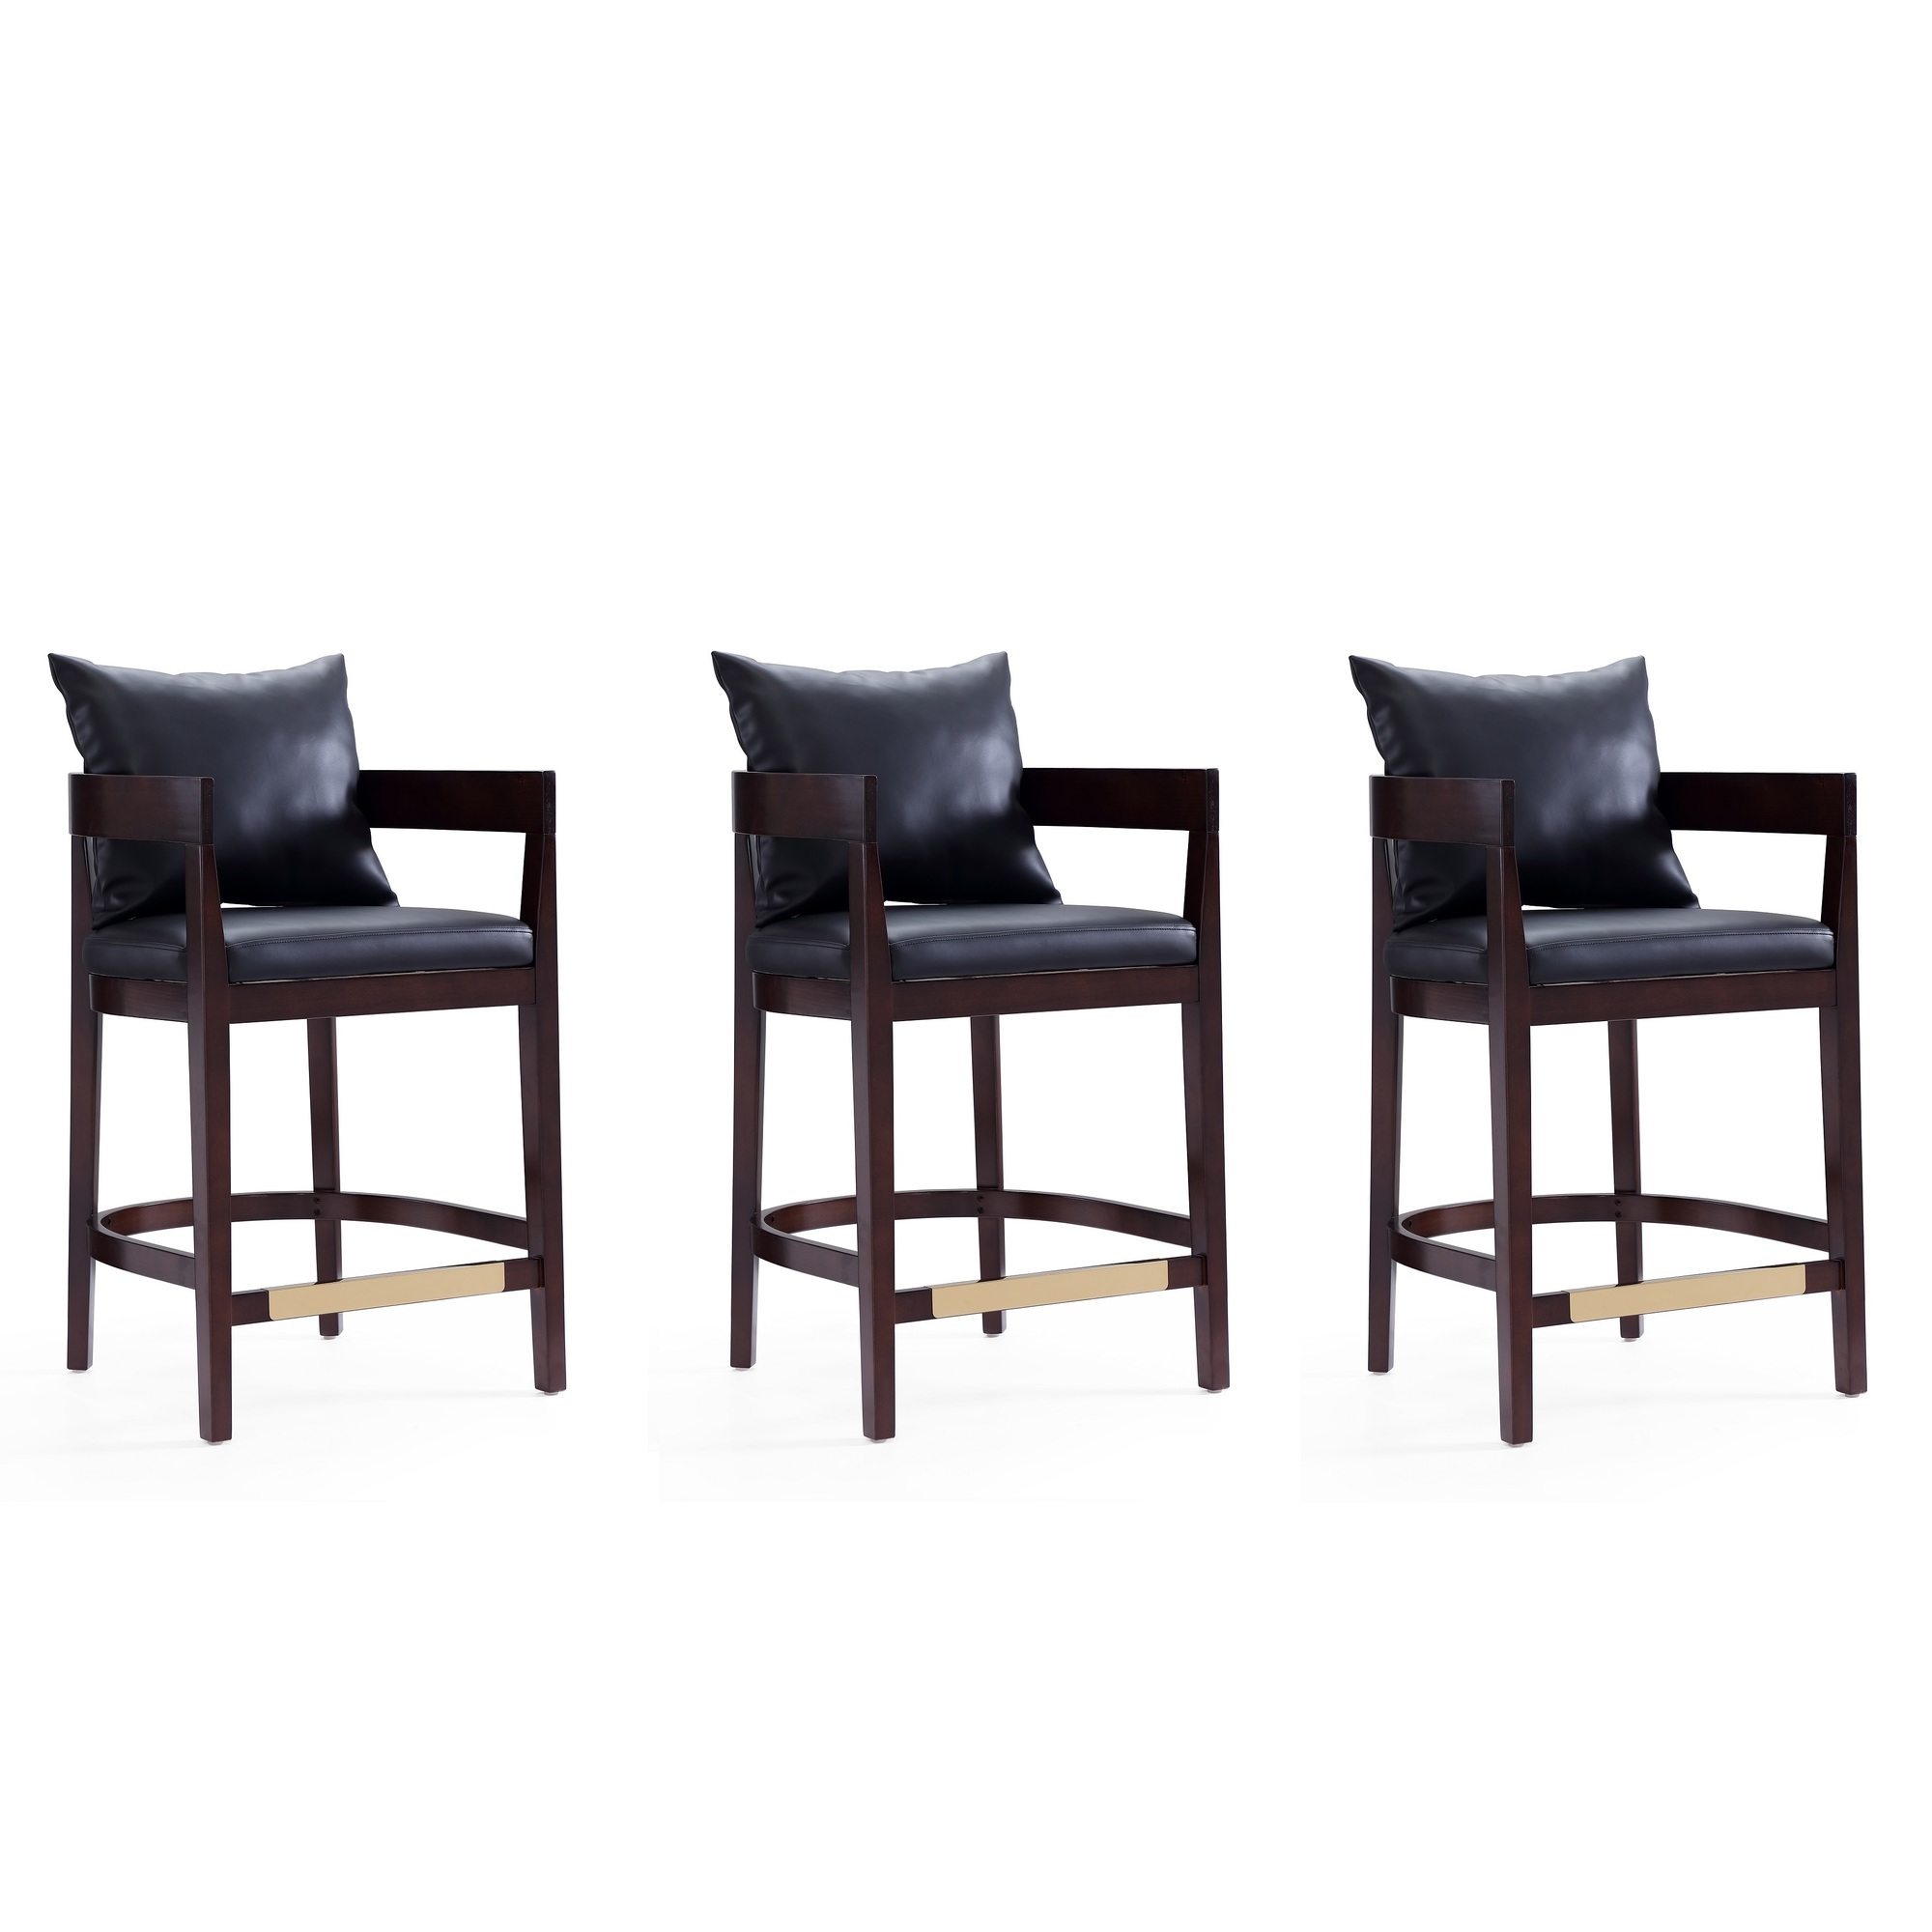 Manhattan Comfort, Ritz 34Inch Black Beech Wood Stool Set of 3 Primary Color Black, Included (qty.) 3 Model 3-CS006